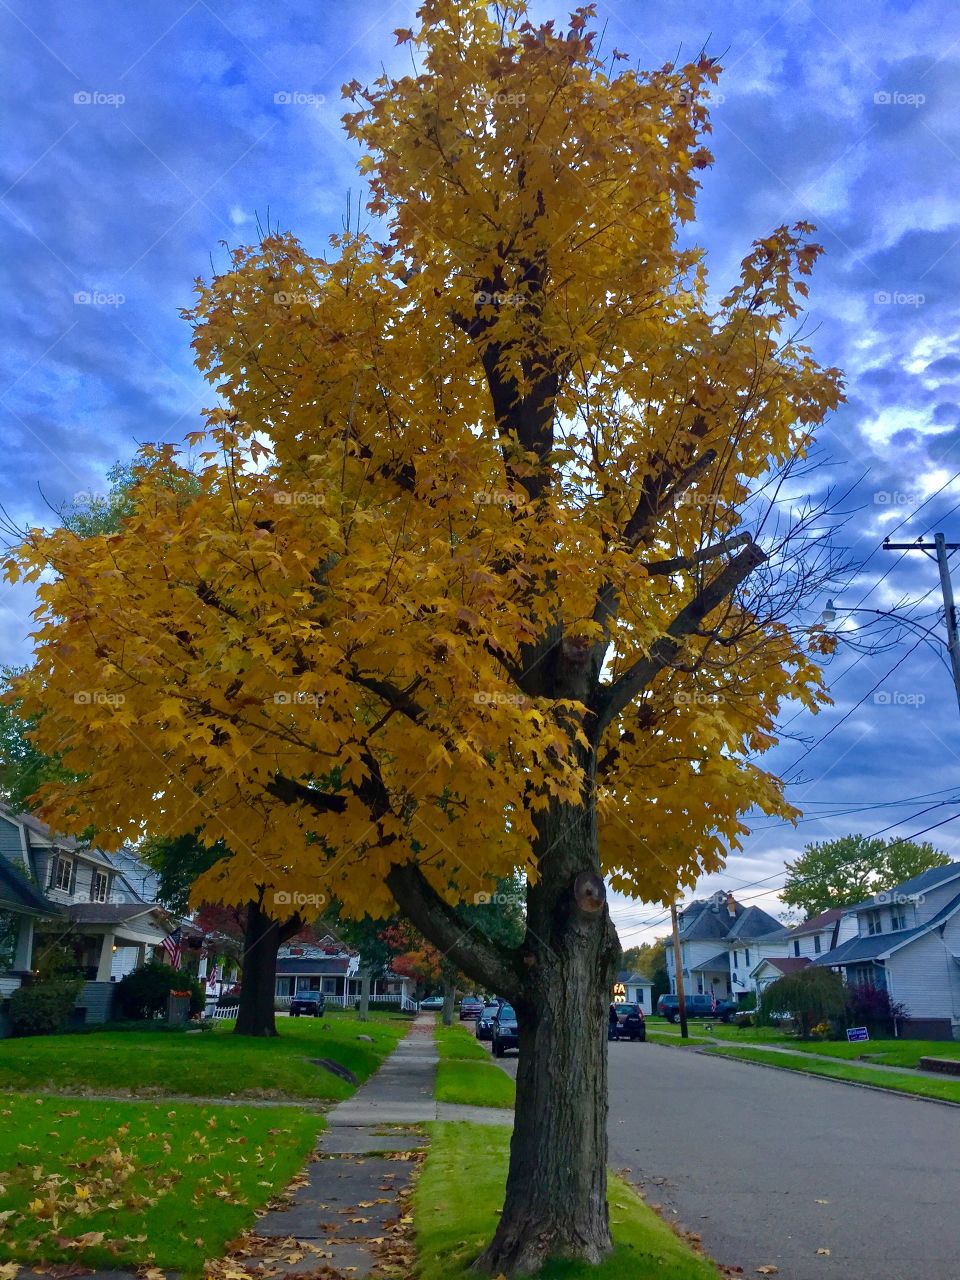 Just a tree in the neighborhood 